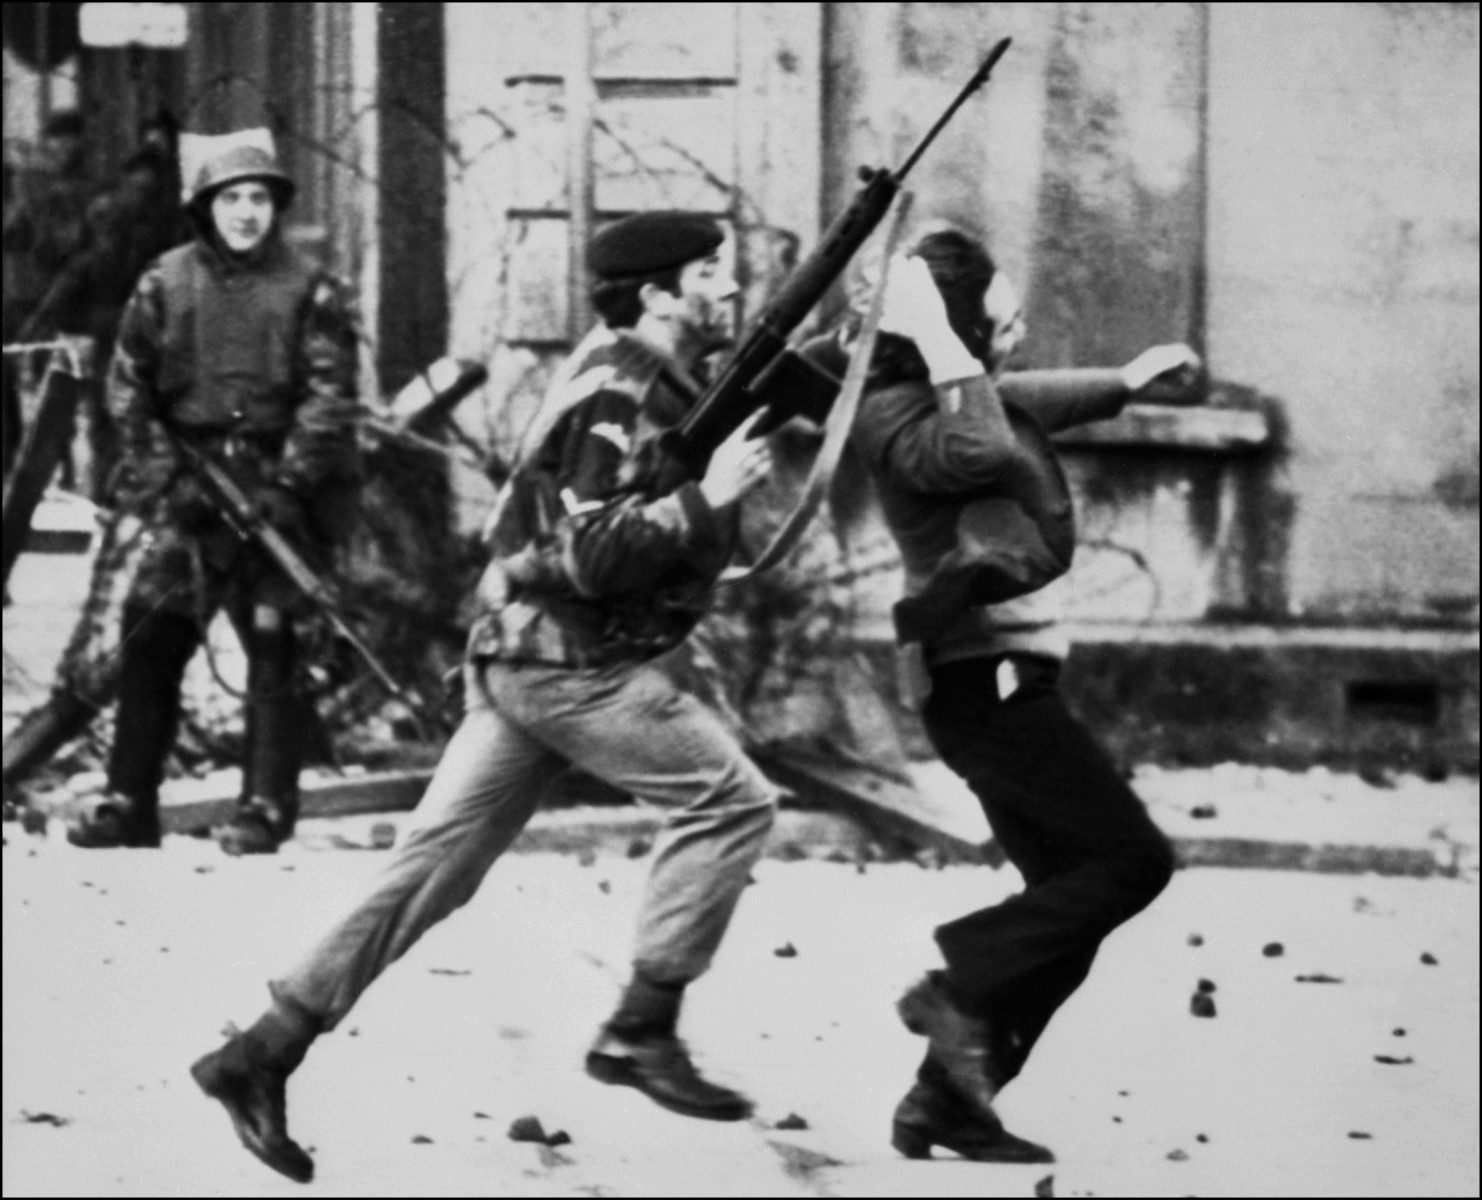 A British paratrooper grabs a captured youth from the crowd on Bloody Sunday